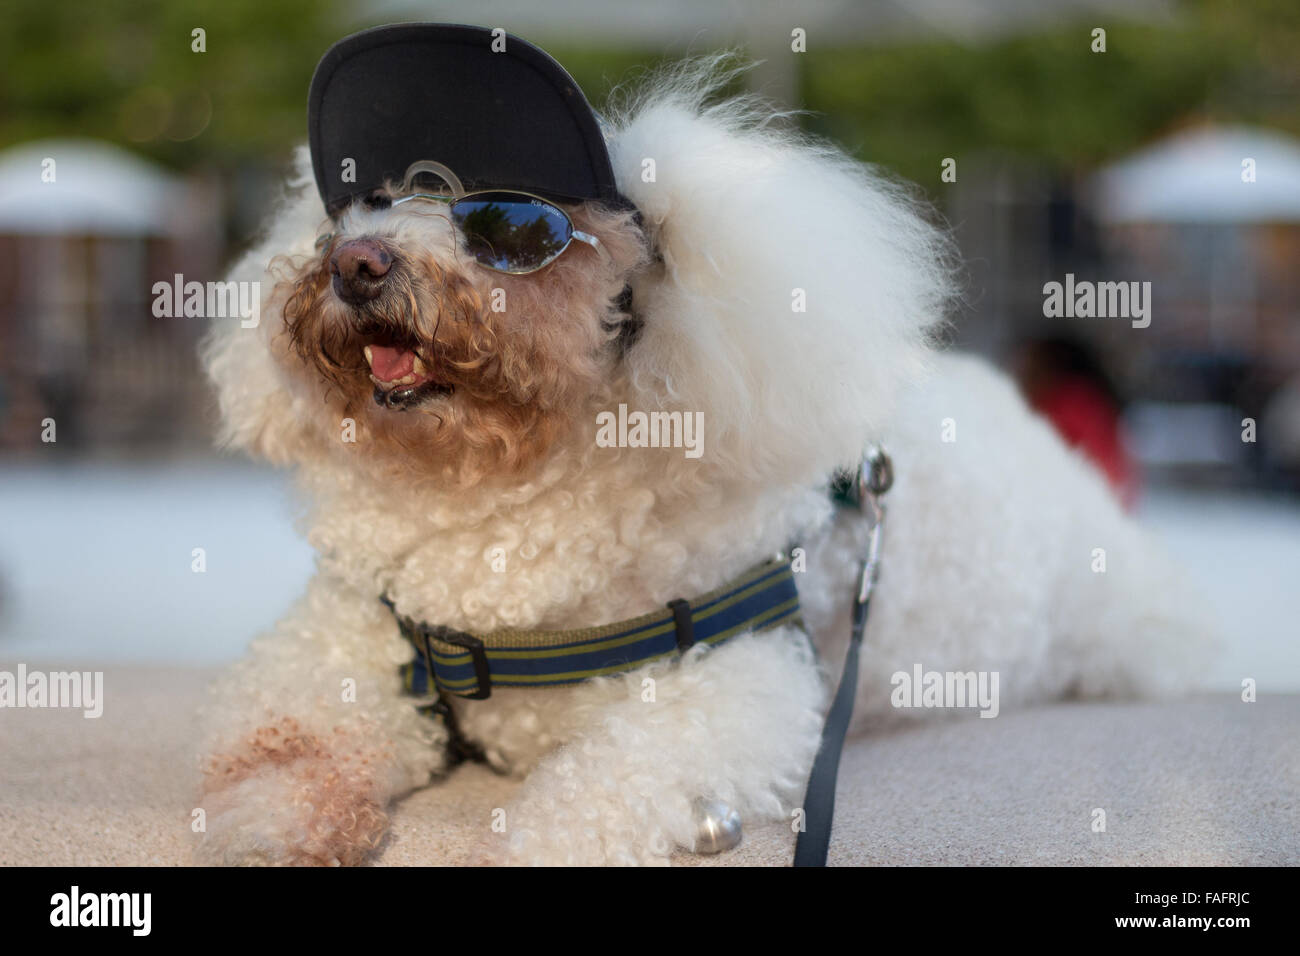 Bichon Frise dressed up in cap and sunglasses. Stock Photo